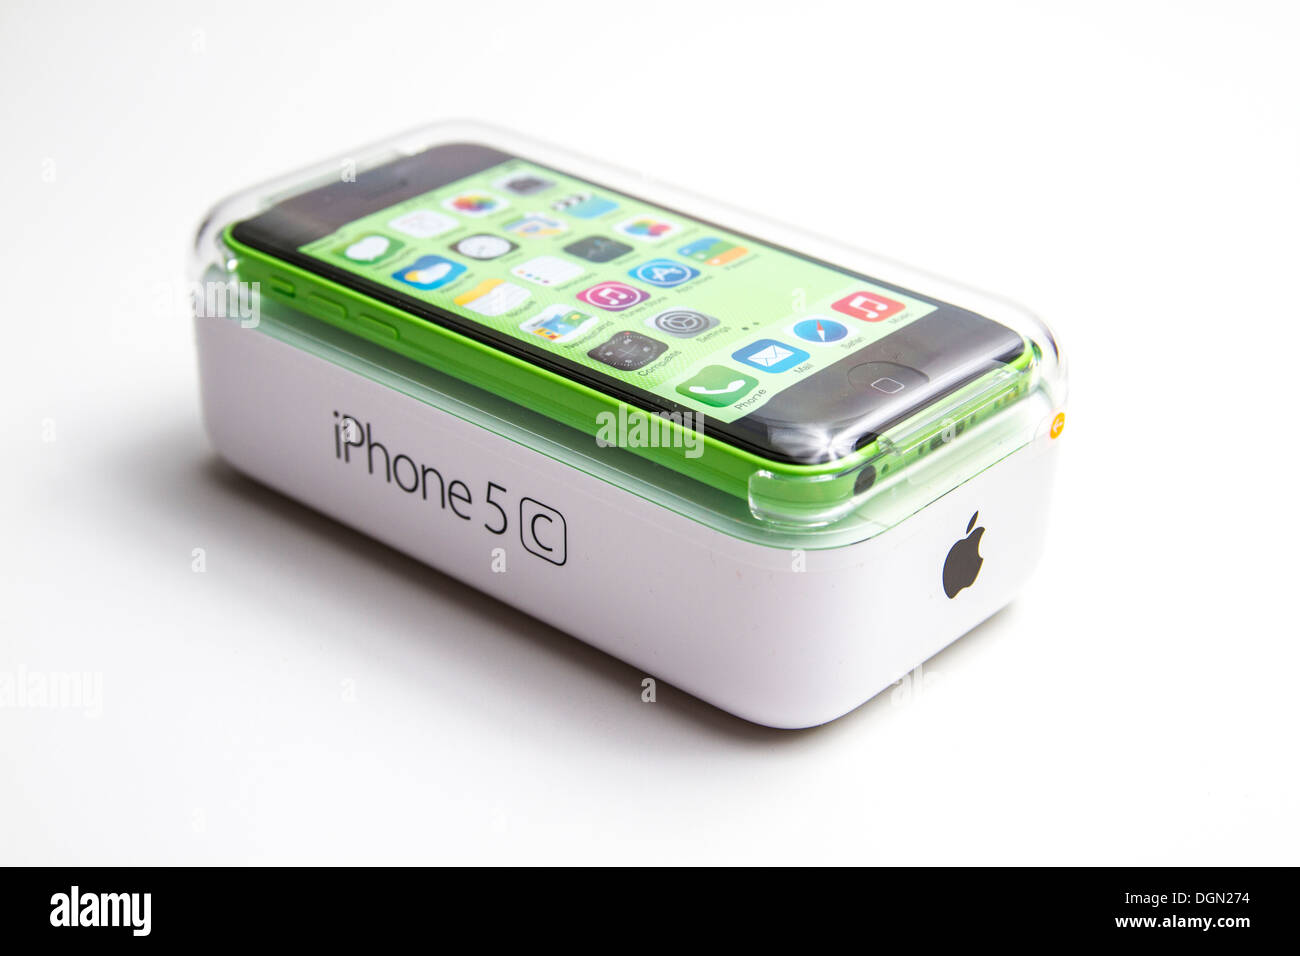 An iphone 5C still in its packaging Stock Photo